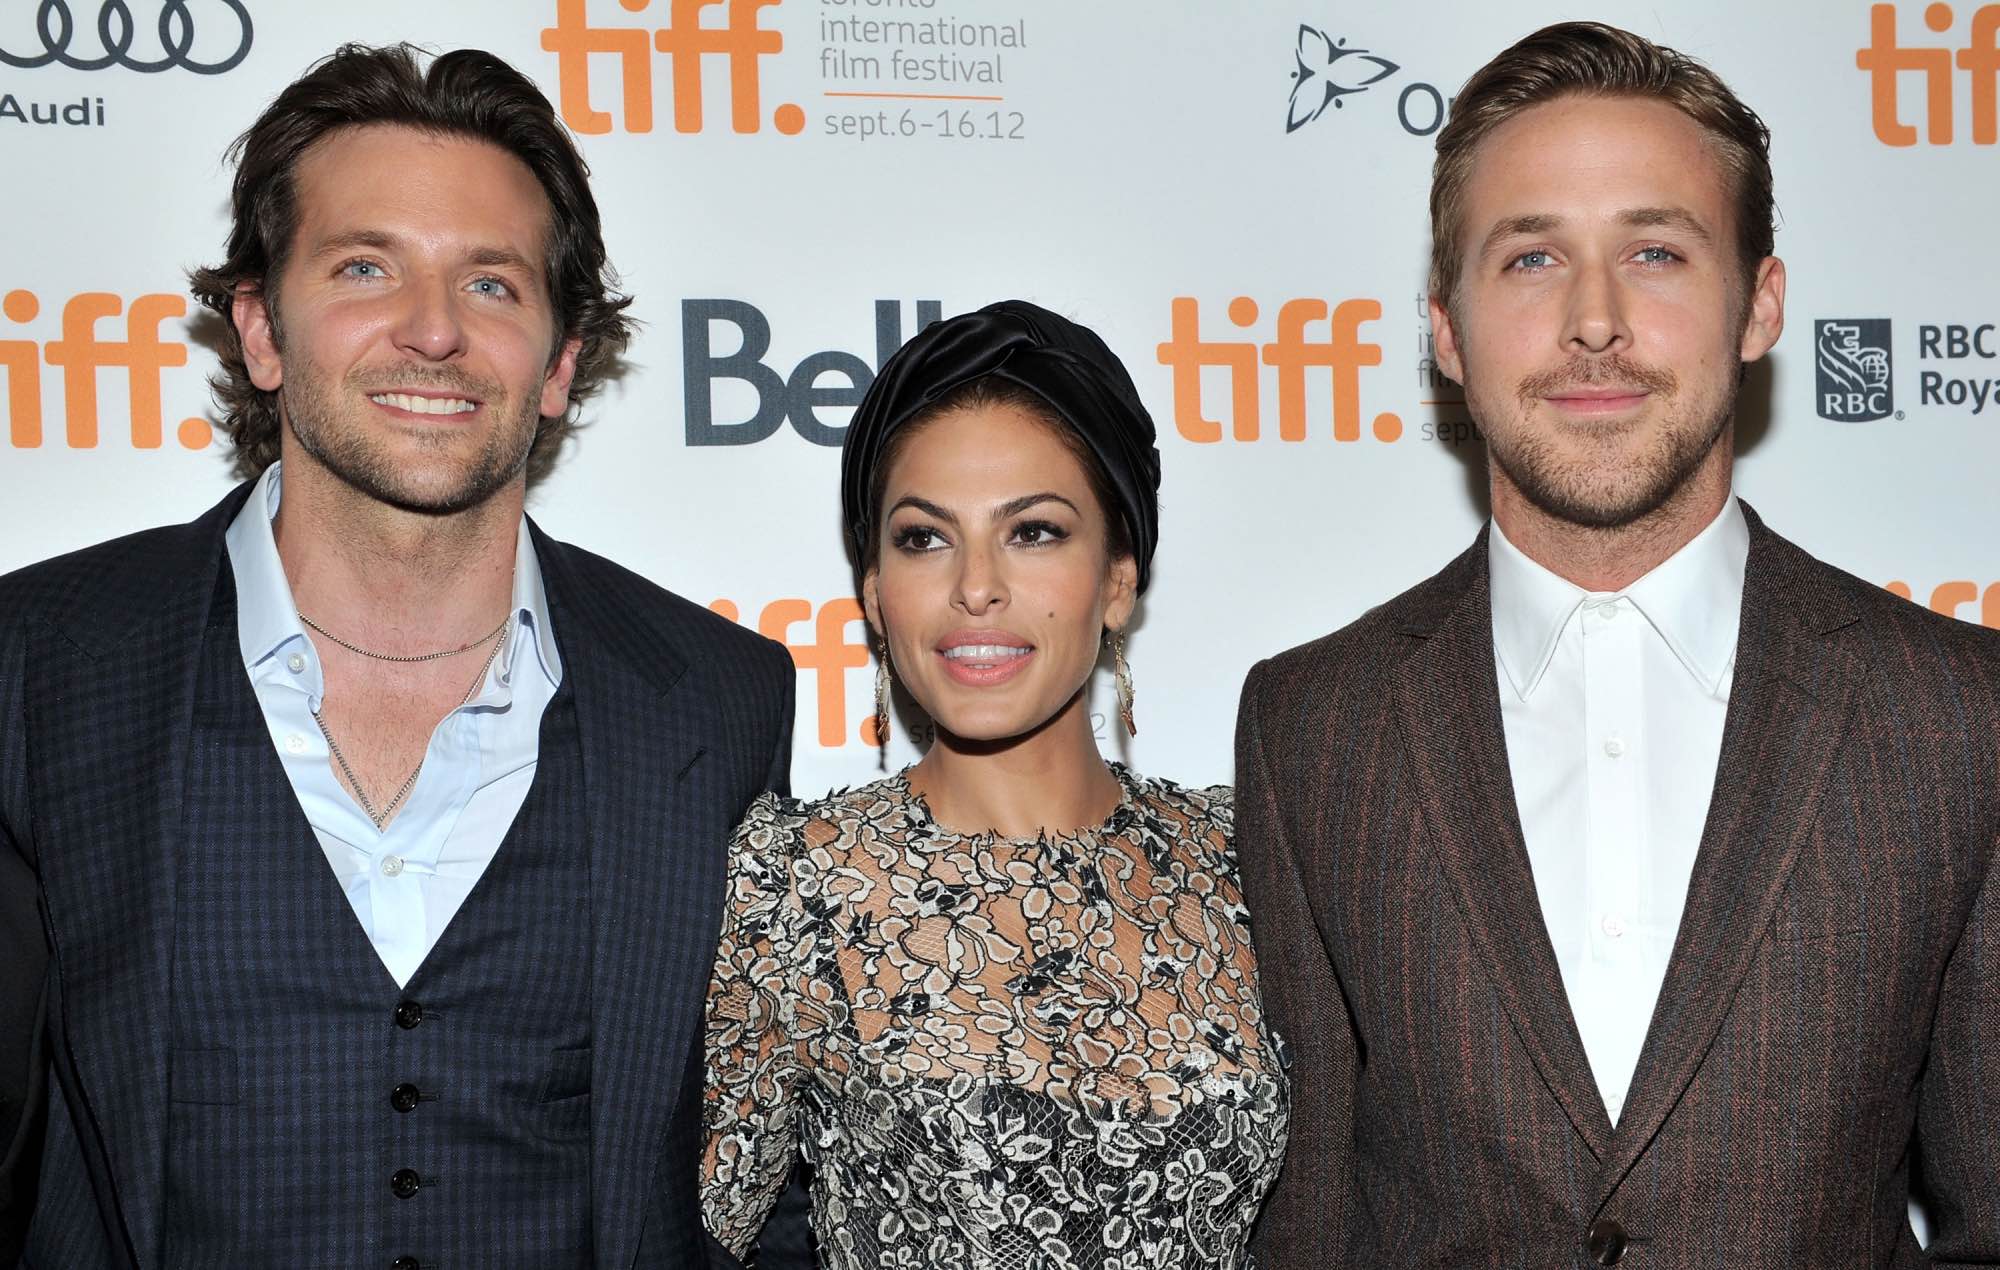 Bradley Cooper nearly quit ‘The Place Beyond The Pines’ after rewrites